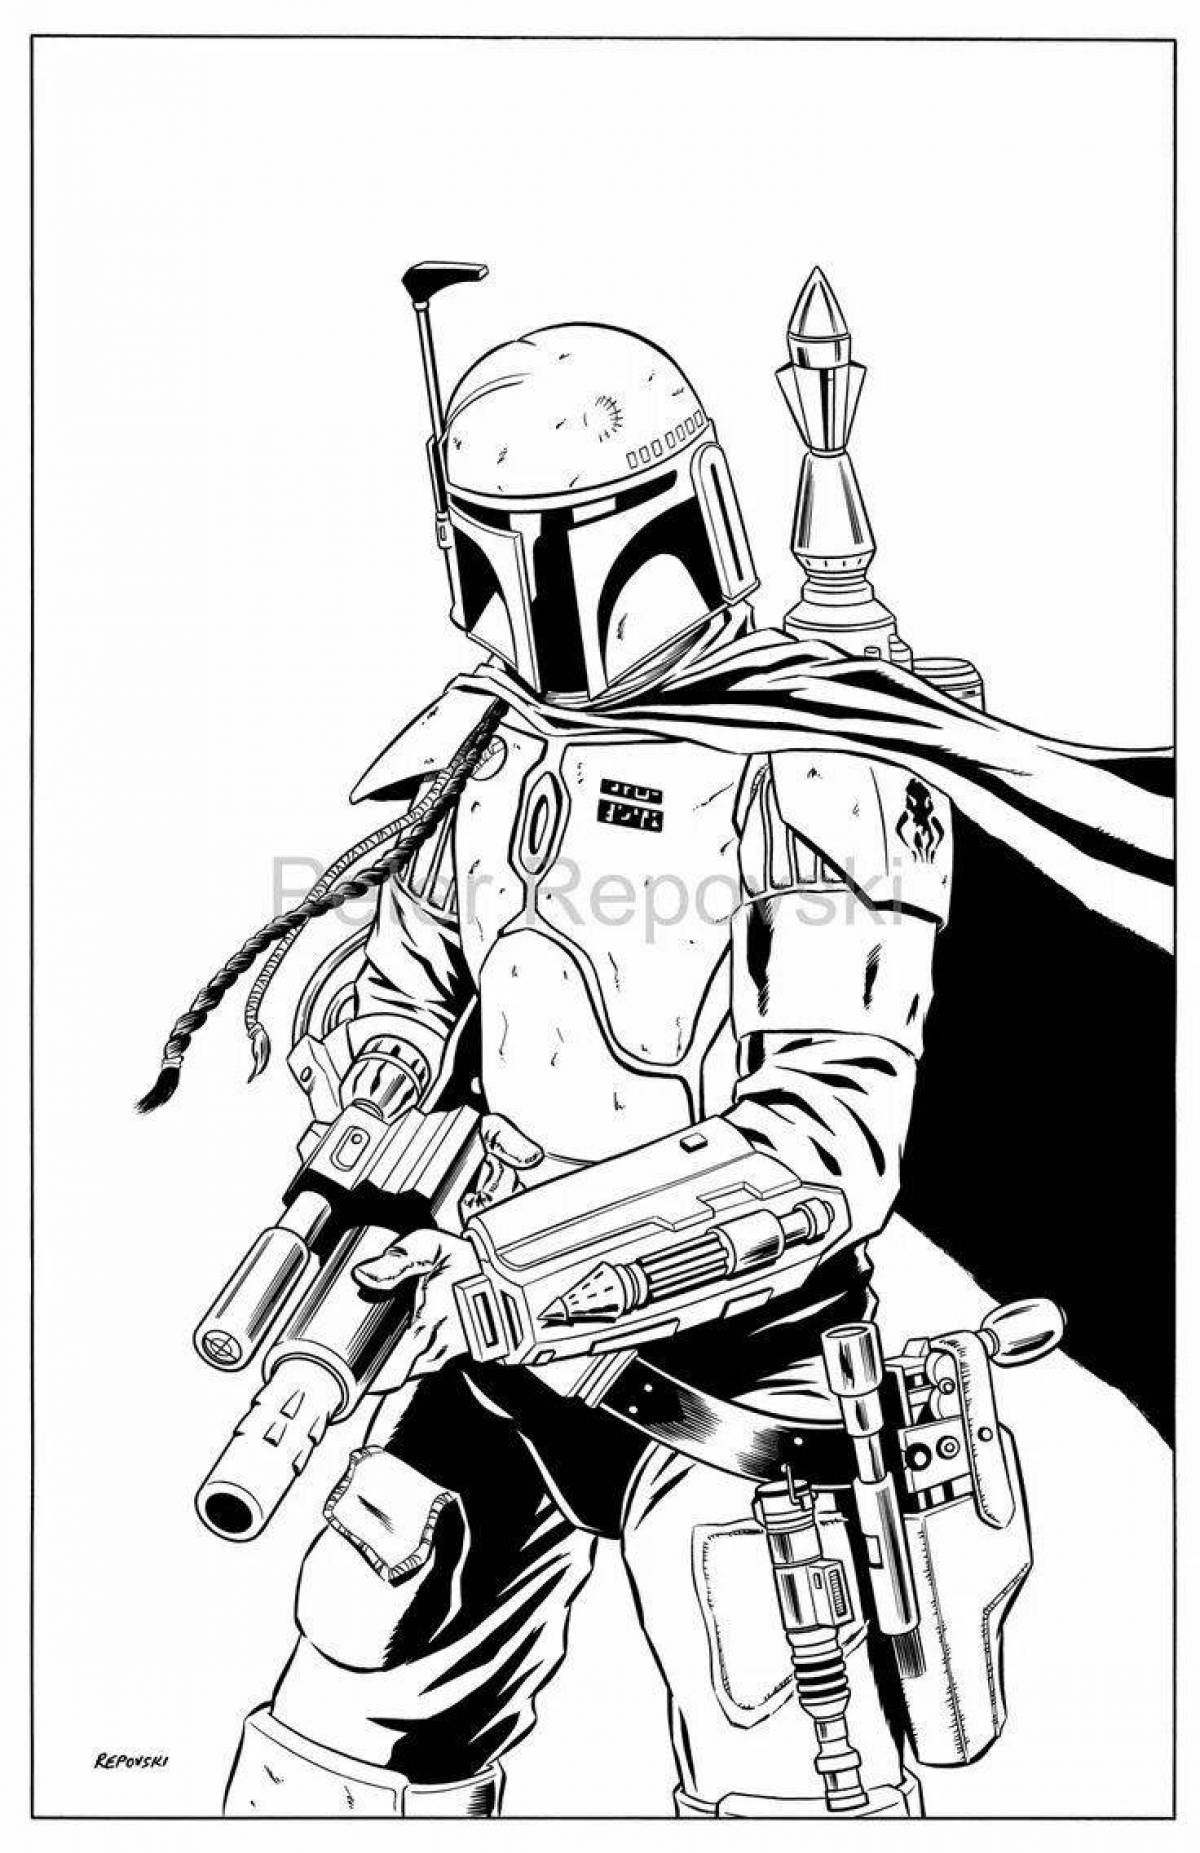 Boba Fett's cheeky coloring page